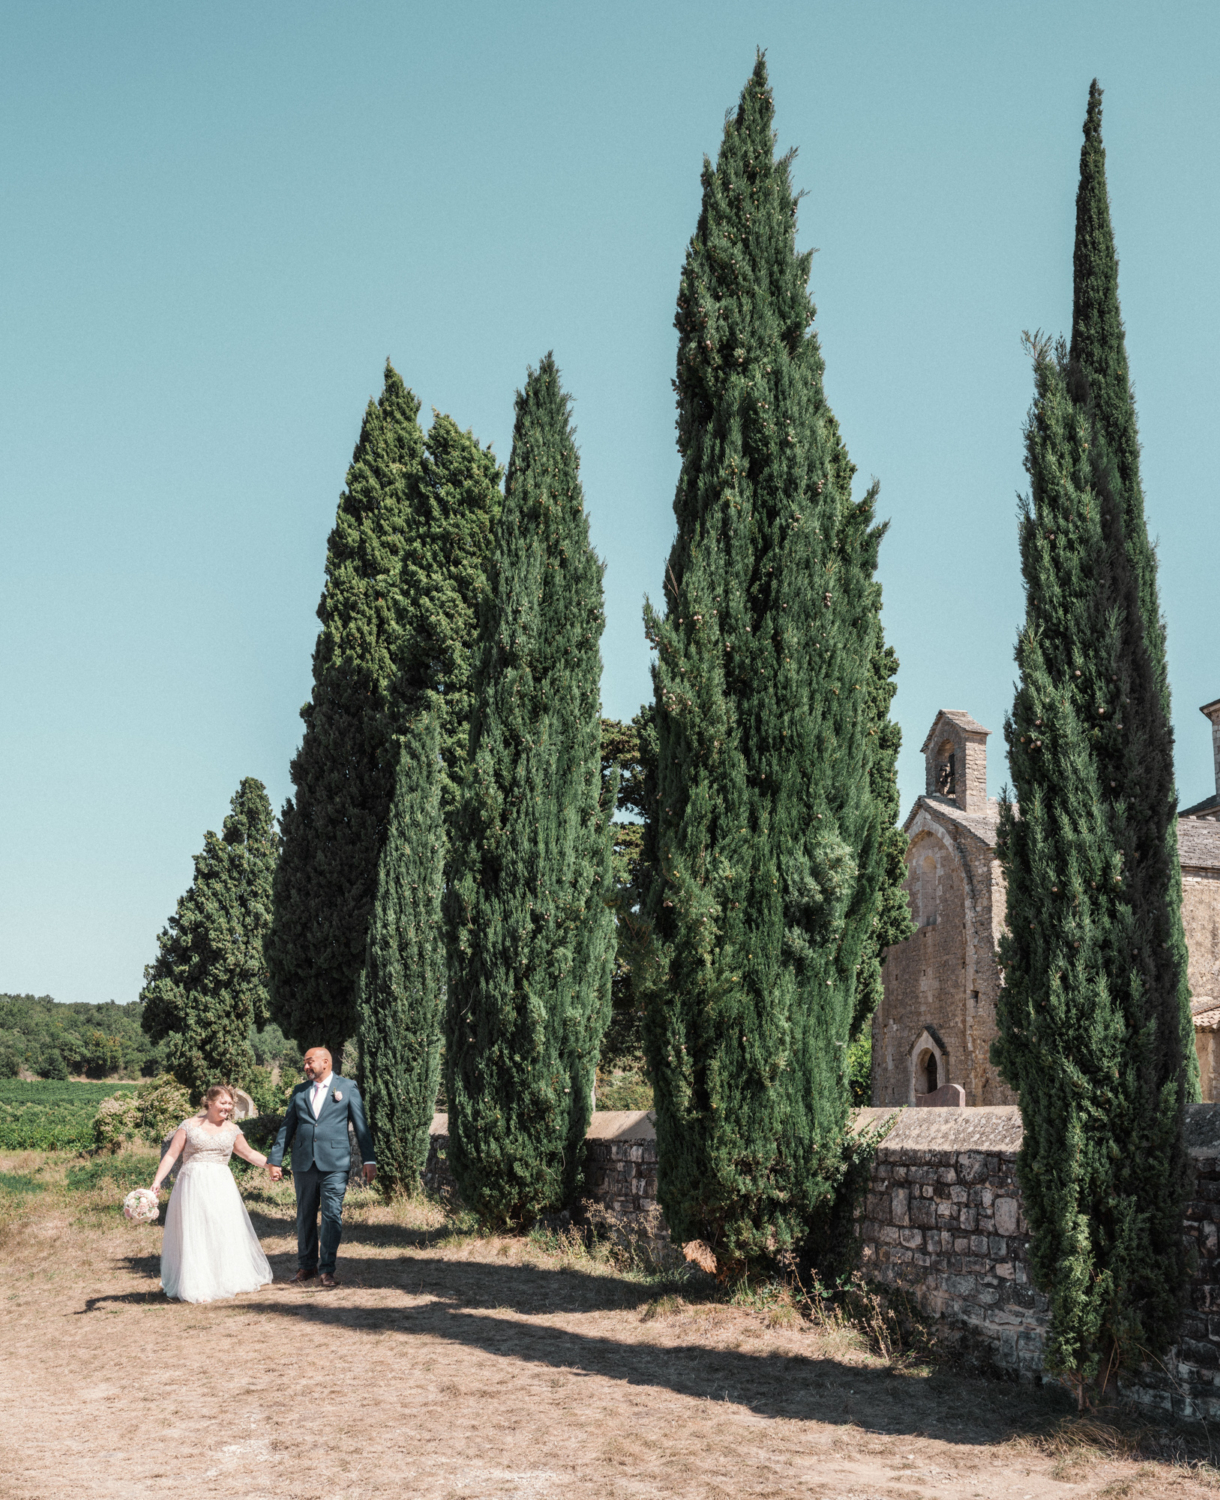 bride and groom walk hand in hand next to cyprus trees